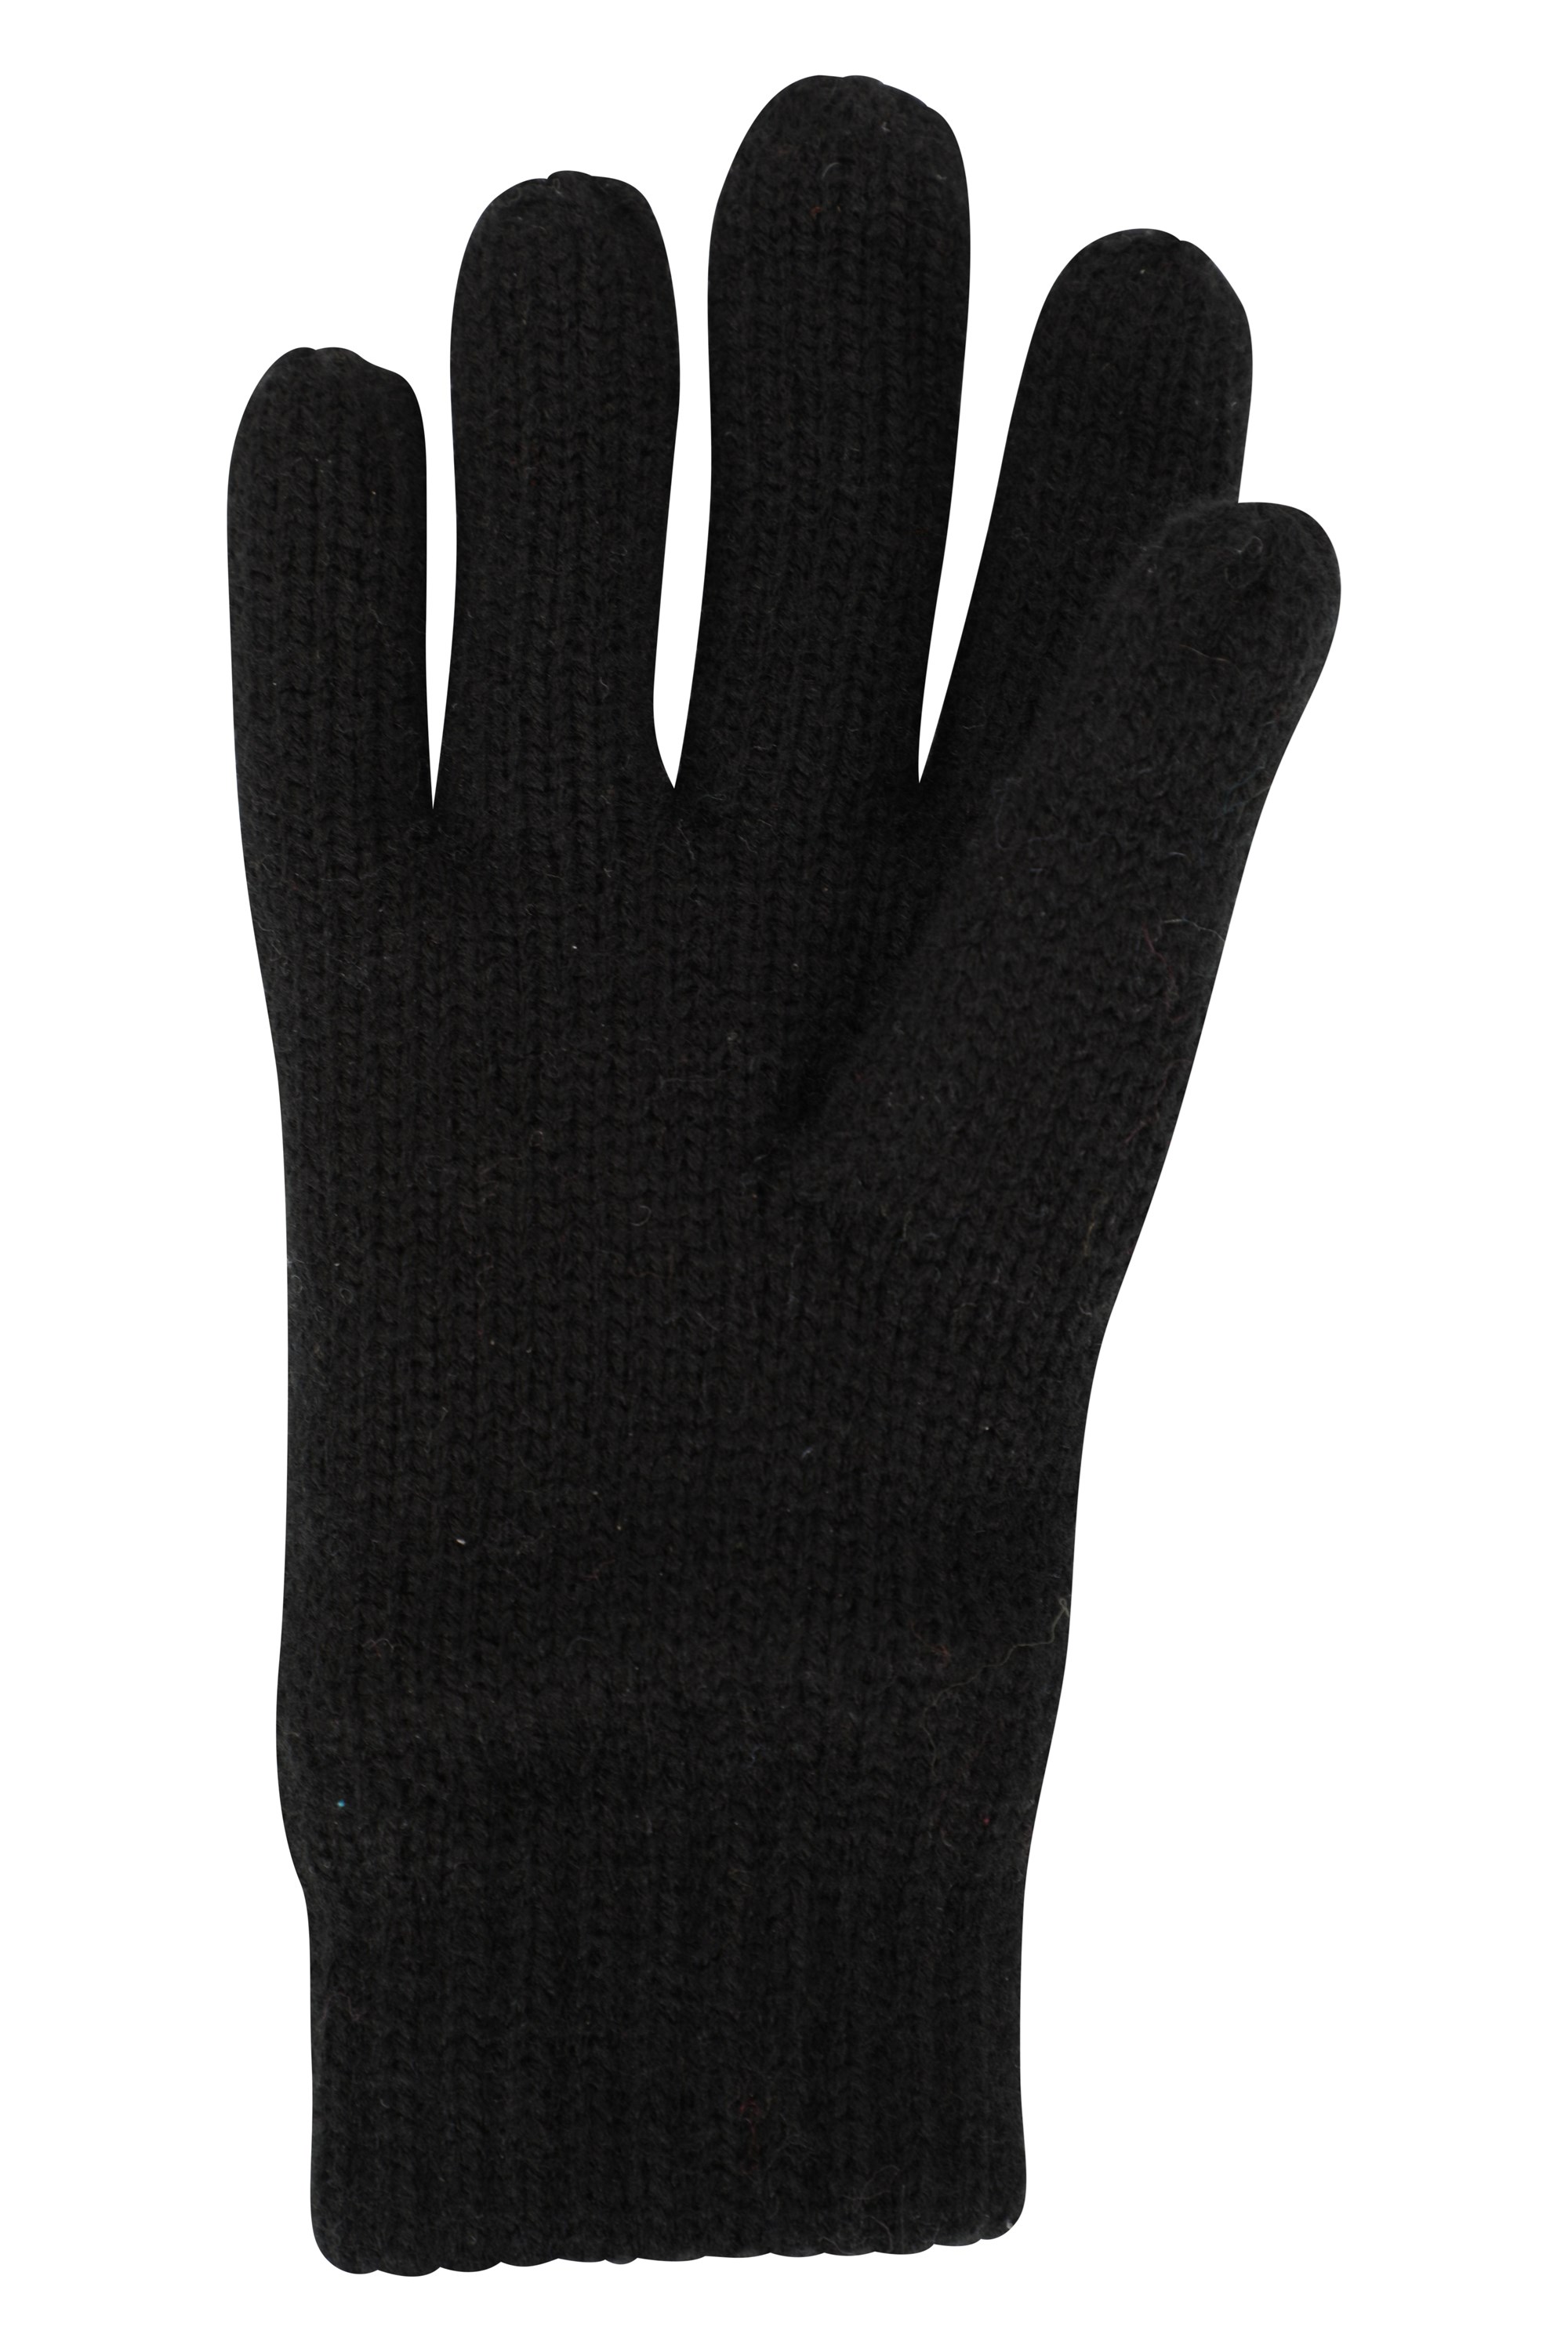 NEW Head YOUTH Thermal Fleece Gloves DuPont Sorona Multi-Layer Fill-VARIETY 